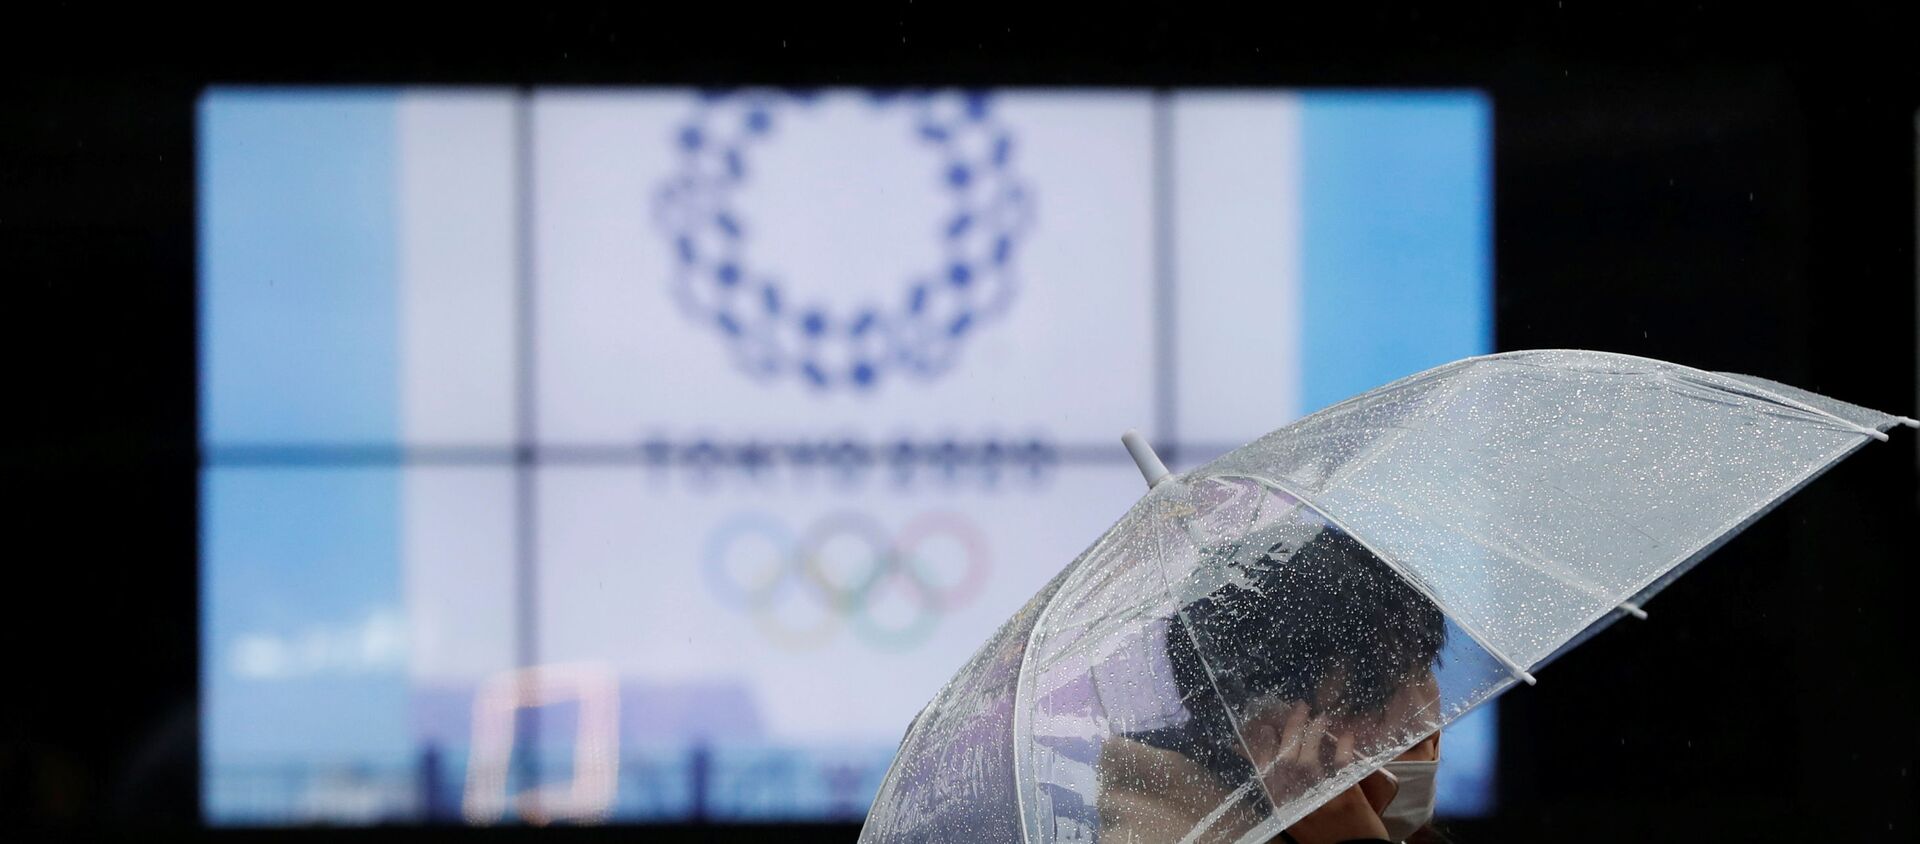 A passerby wearing a protective face mask walks past a display showing the logo of Tokyo 2020 Olympic Games that have been postponed to 2021 due to the coronavirus disease (COVID-19) outbreak, in Tokyo, Japan January 23, 2021. - 俄罗斯卫星通讯社, 1920, 08.02.2021